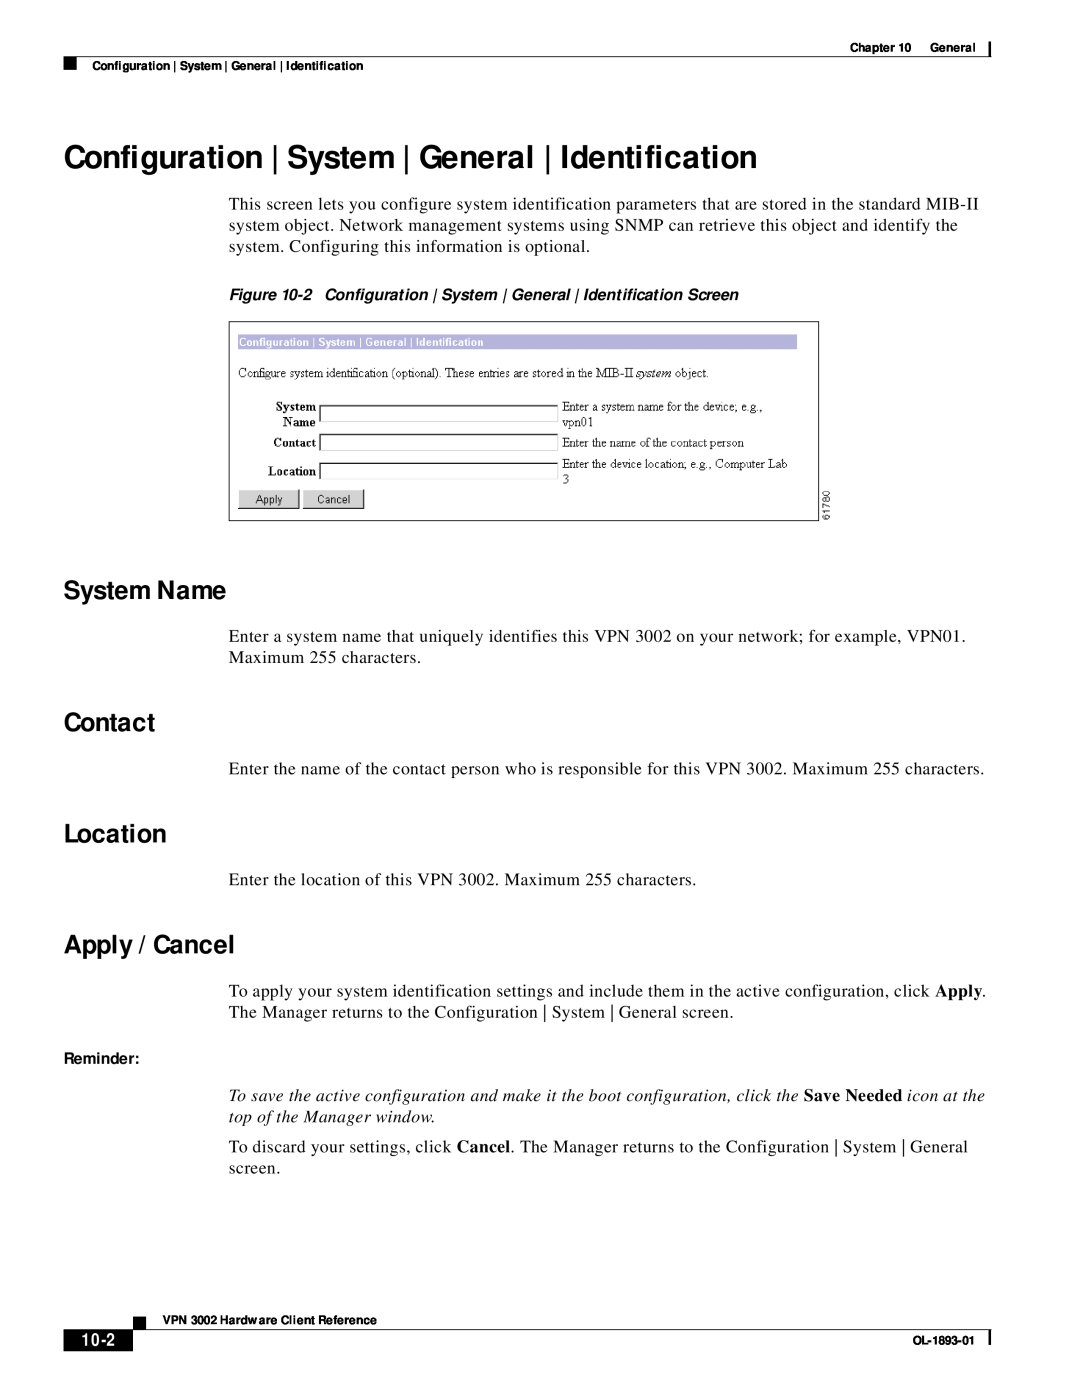 Cisco Systems VPN 3002 Configuration | System | General | Identification, System Name, Contact, Location, 10-2, Reminder 